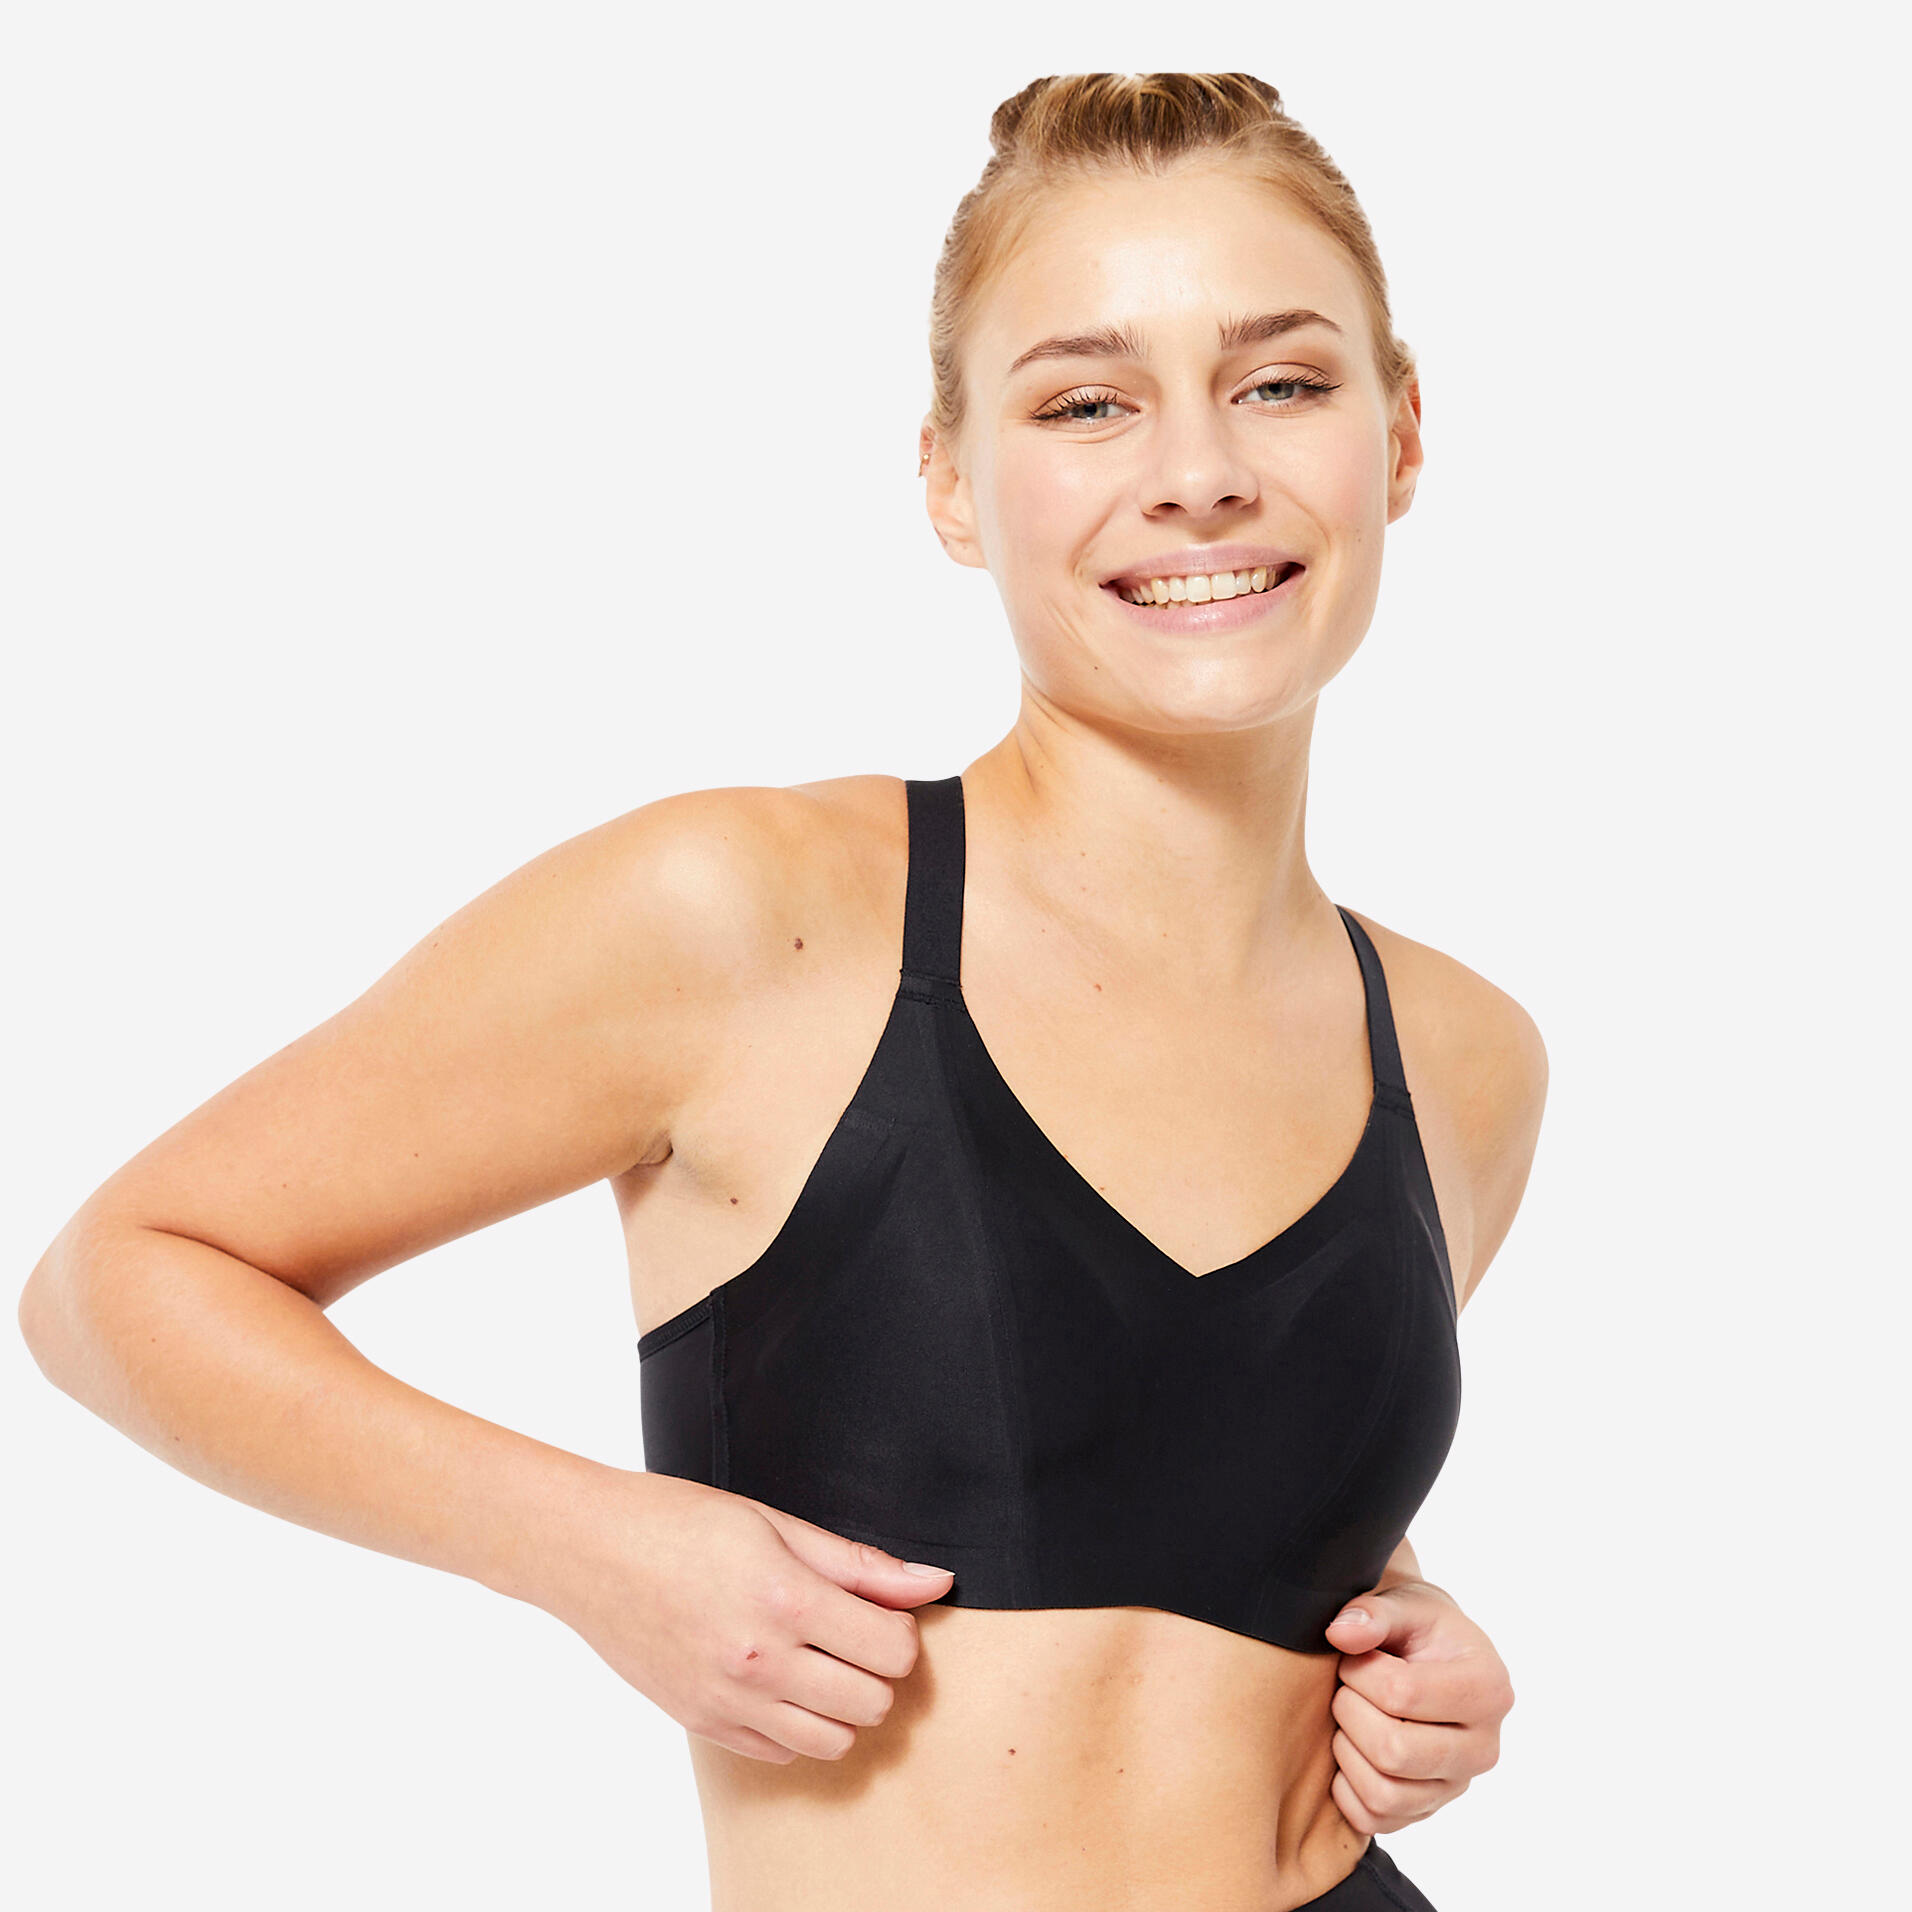 Women's invisible sports bra with high-support cups - Black 1/5